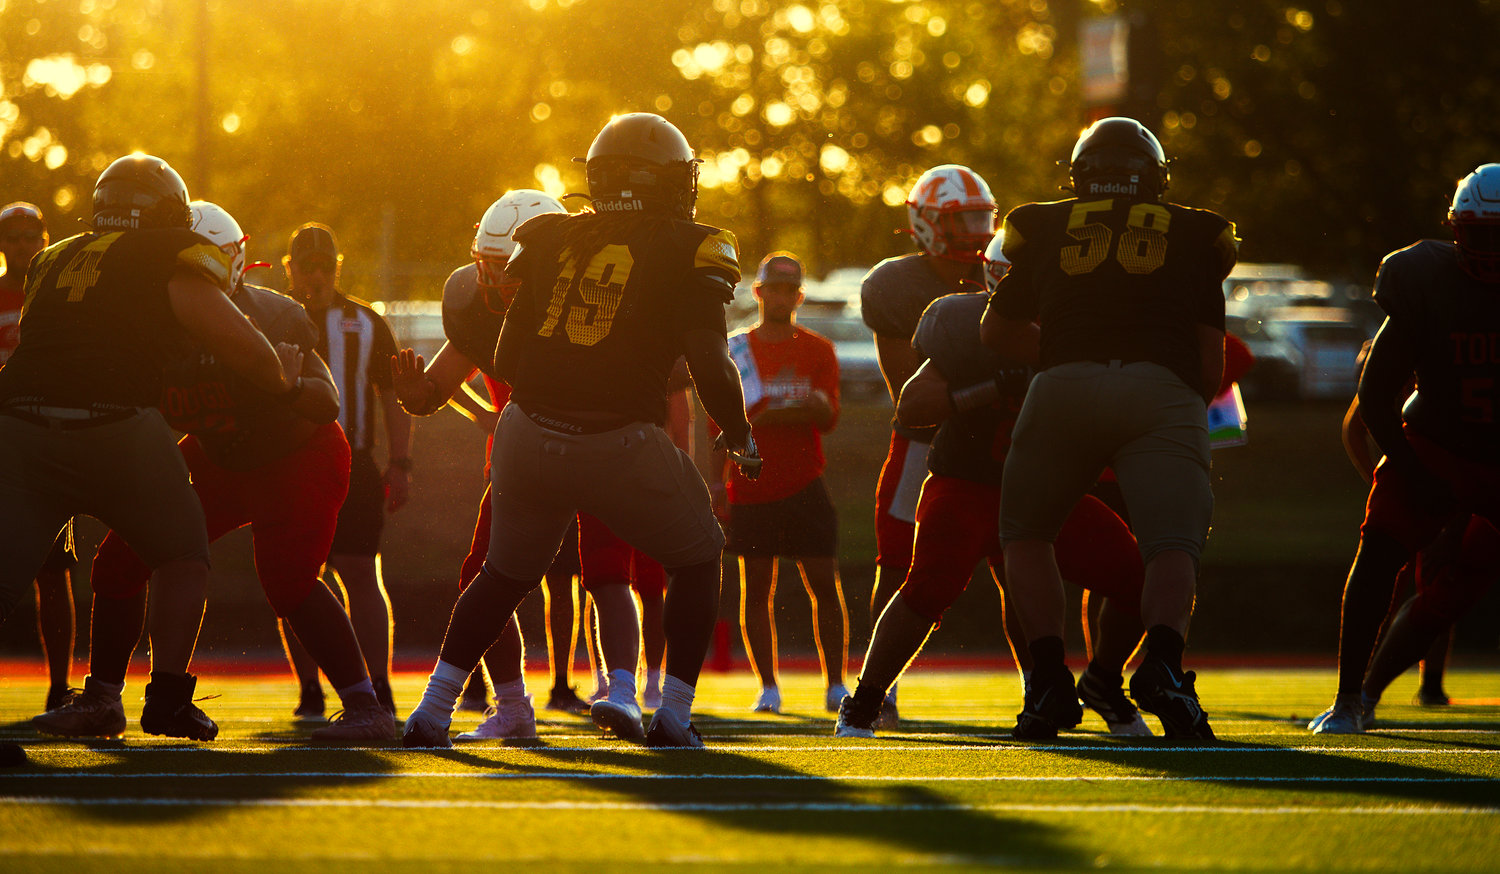 The late summer sun highlights the Mineola and Winona football teams during last Friday’s scrimmage at Meredith Memorial Stadium in Mineola, signaling the beginning of the 2022 football season for Texas high schools.